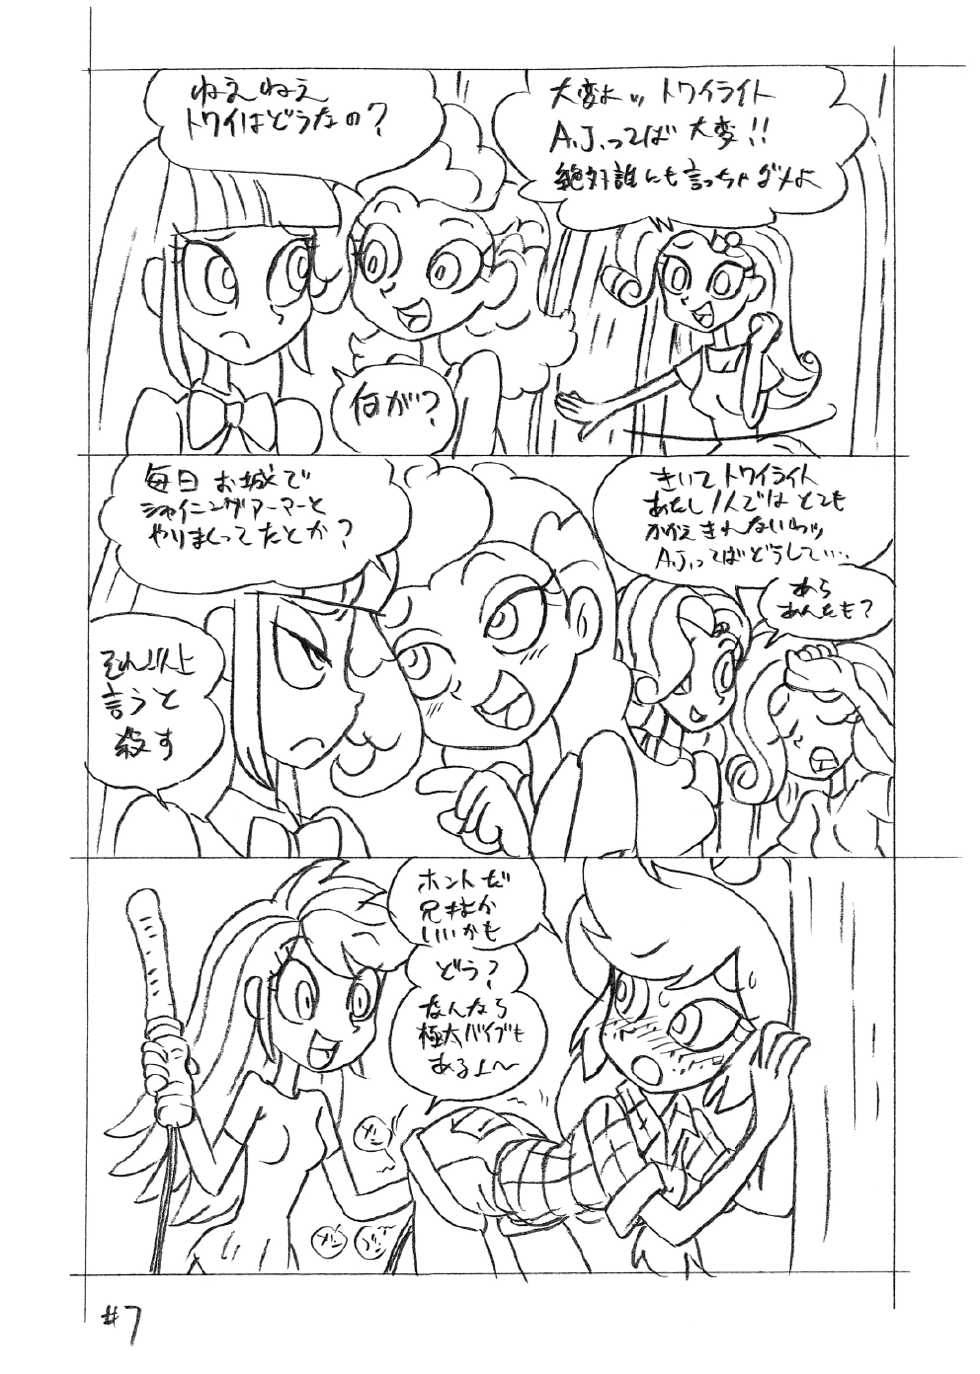 [Union of the Snake (Shinda Mane)] Psychosomatic Counterfeit EX- A.J. in E.G. Style (Ver. 02) (My Little Pony: Friendship Is Magic) - Page 6